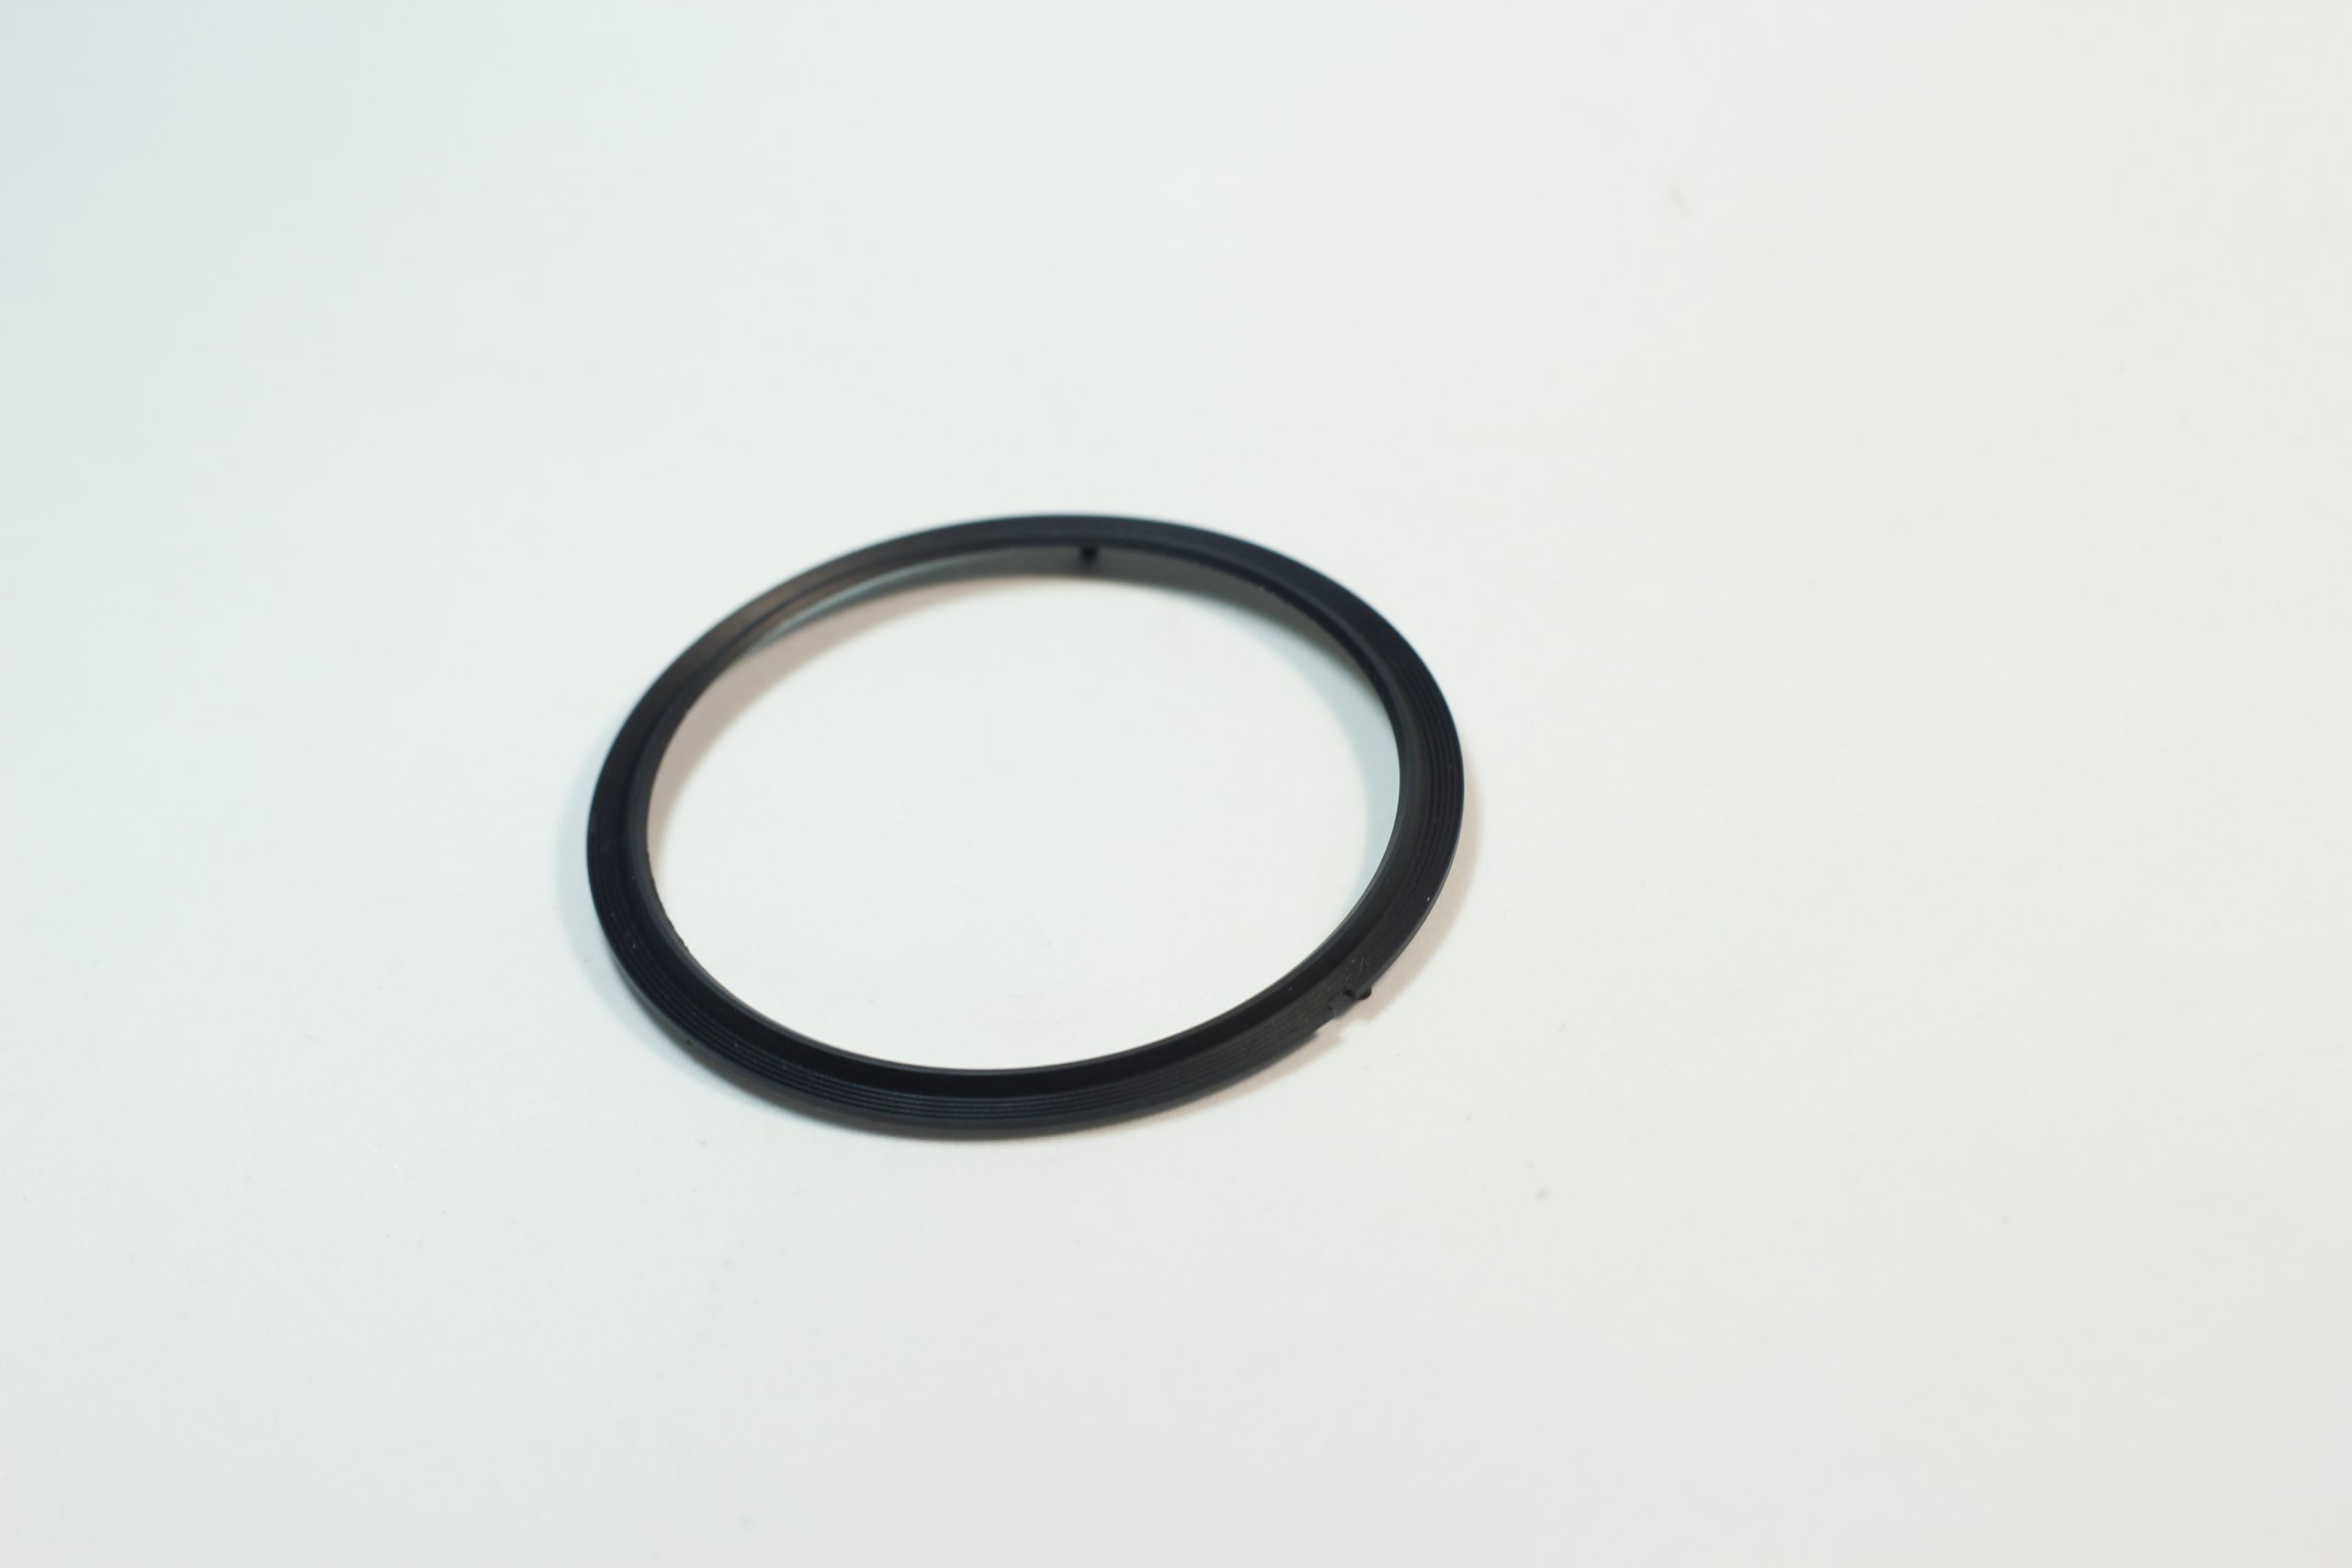 TAMRON 17-50MM 2.8 XR LD NON VC FRONT RING COVER REPAIR PART